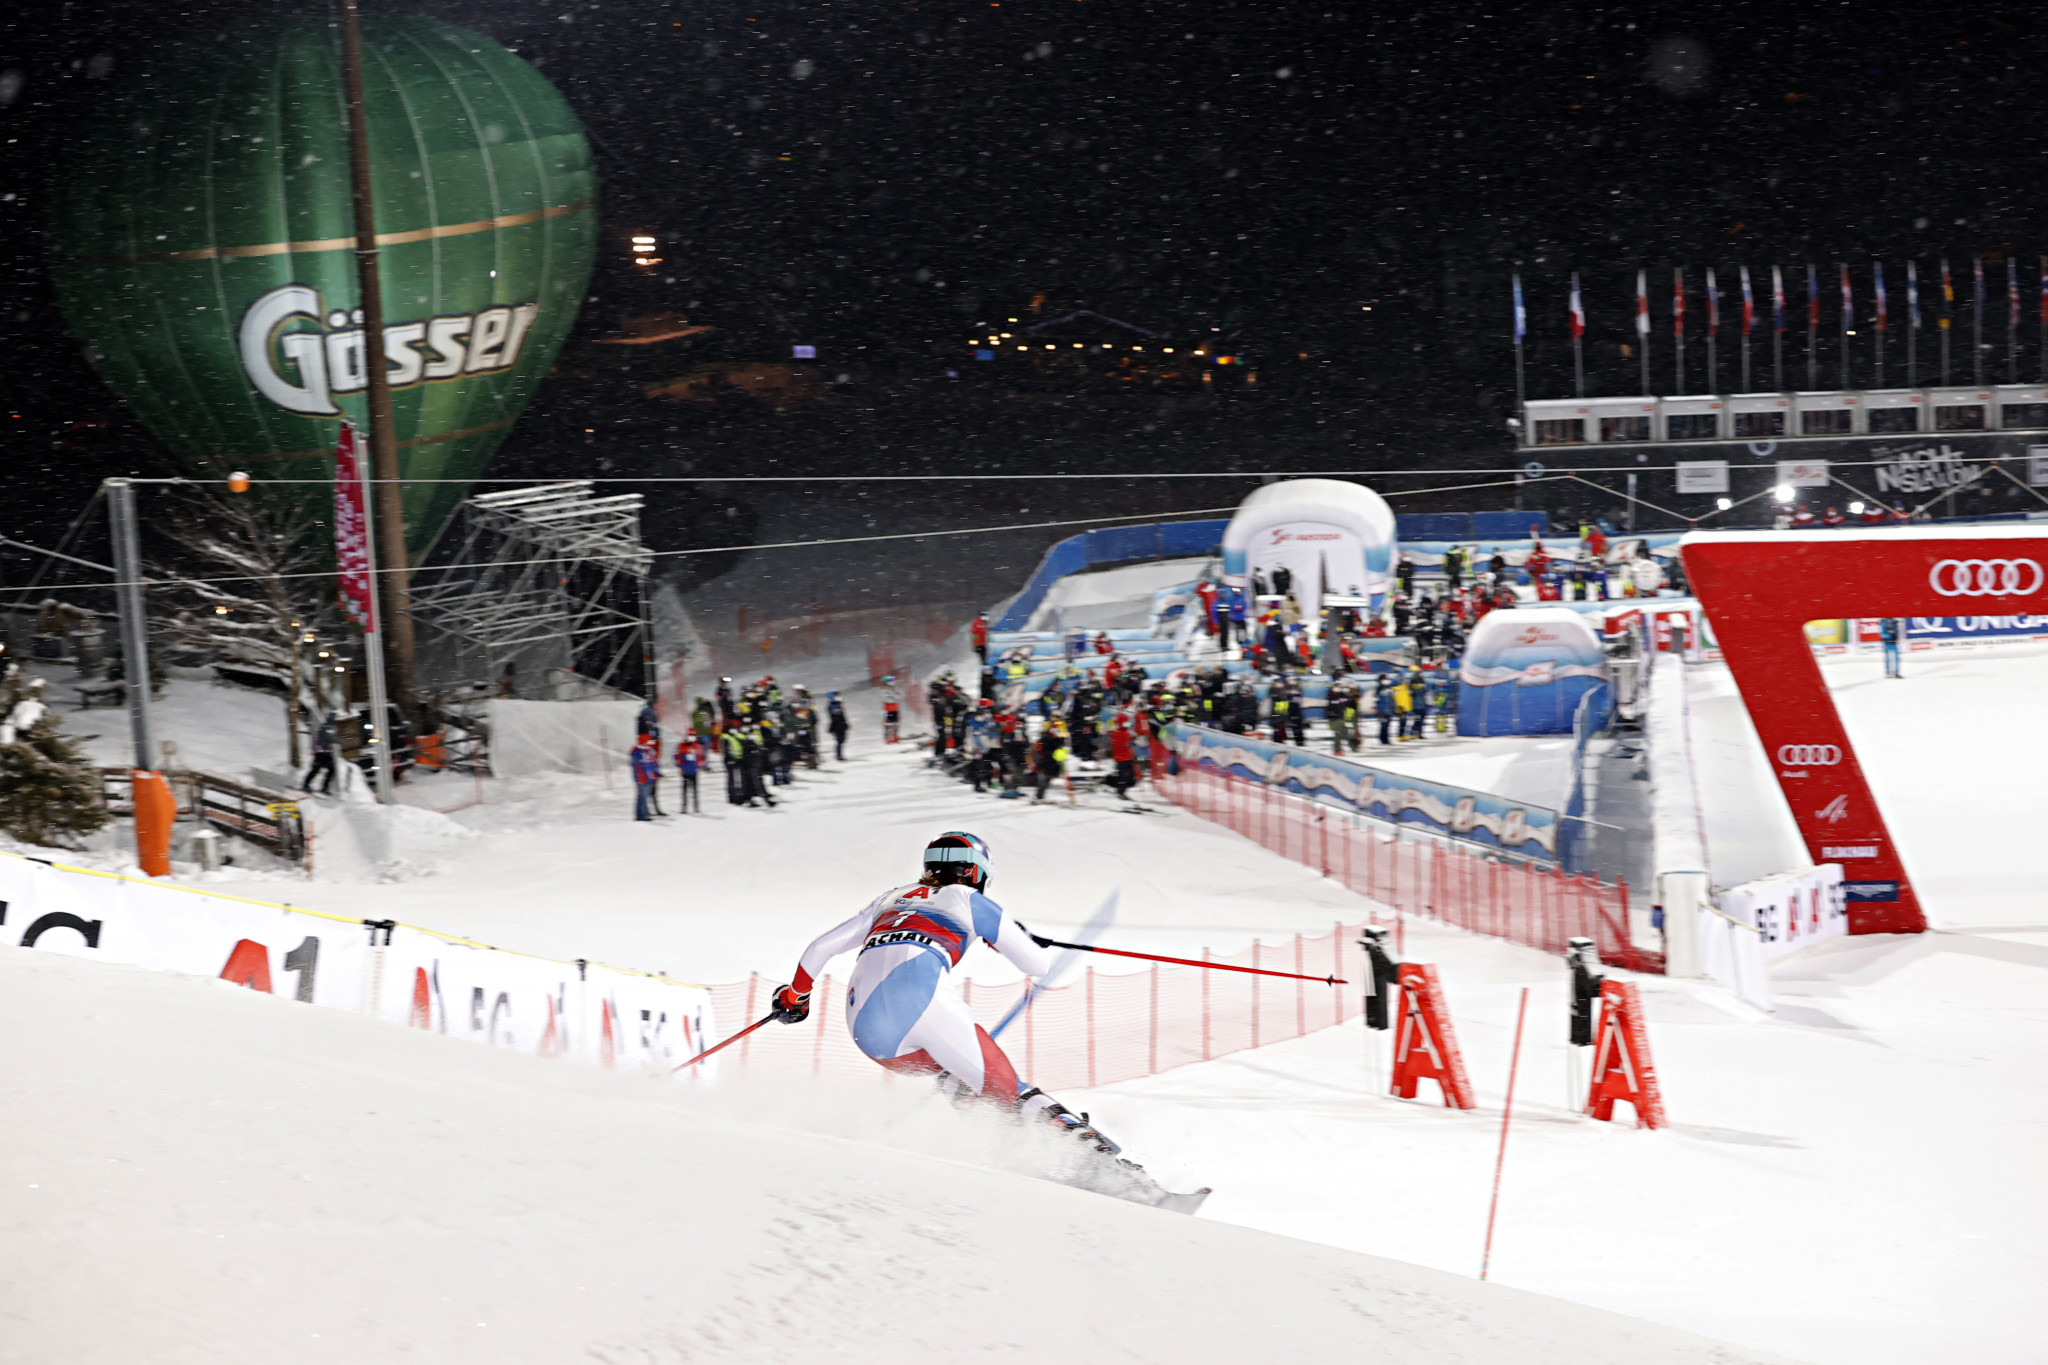 FIS Alpine World Cup returns to Flachau after Kitzbühel and Wengen cancellations